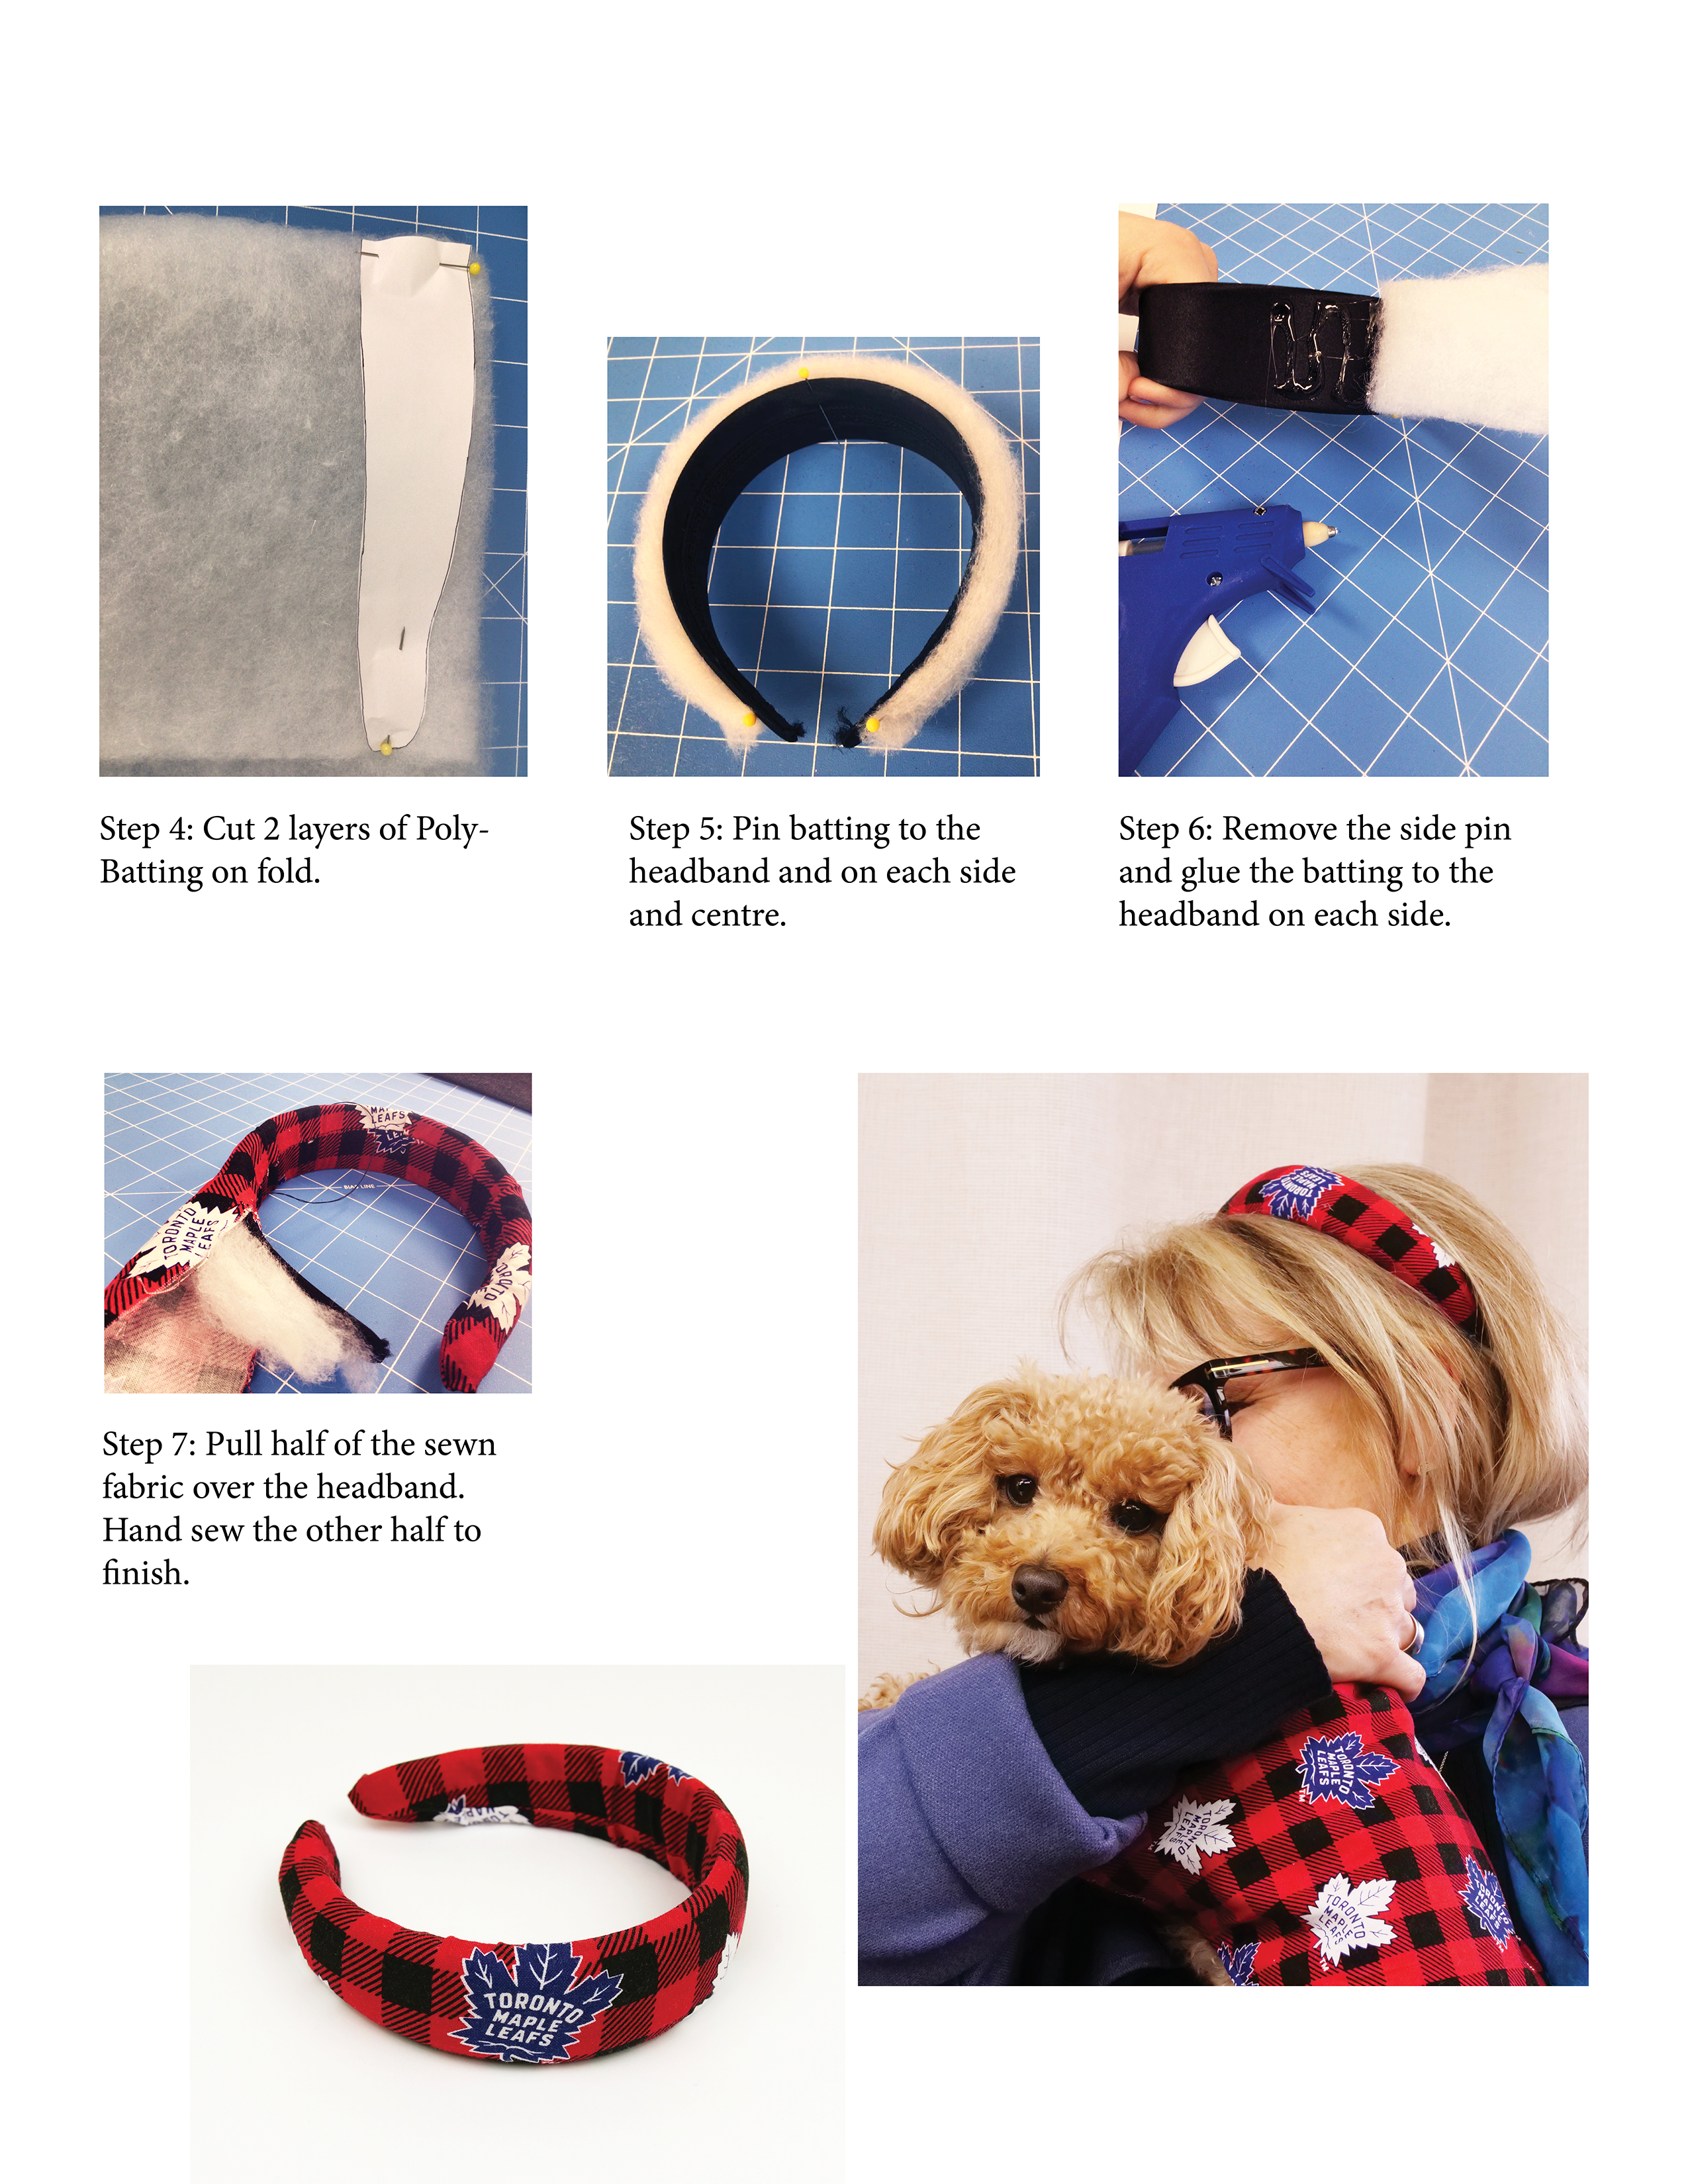 Last set of steps to creating your own printed padded headband